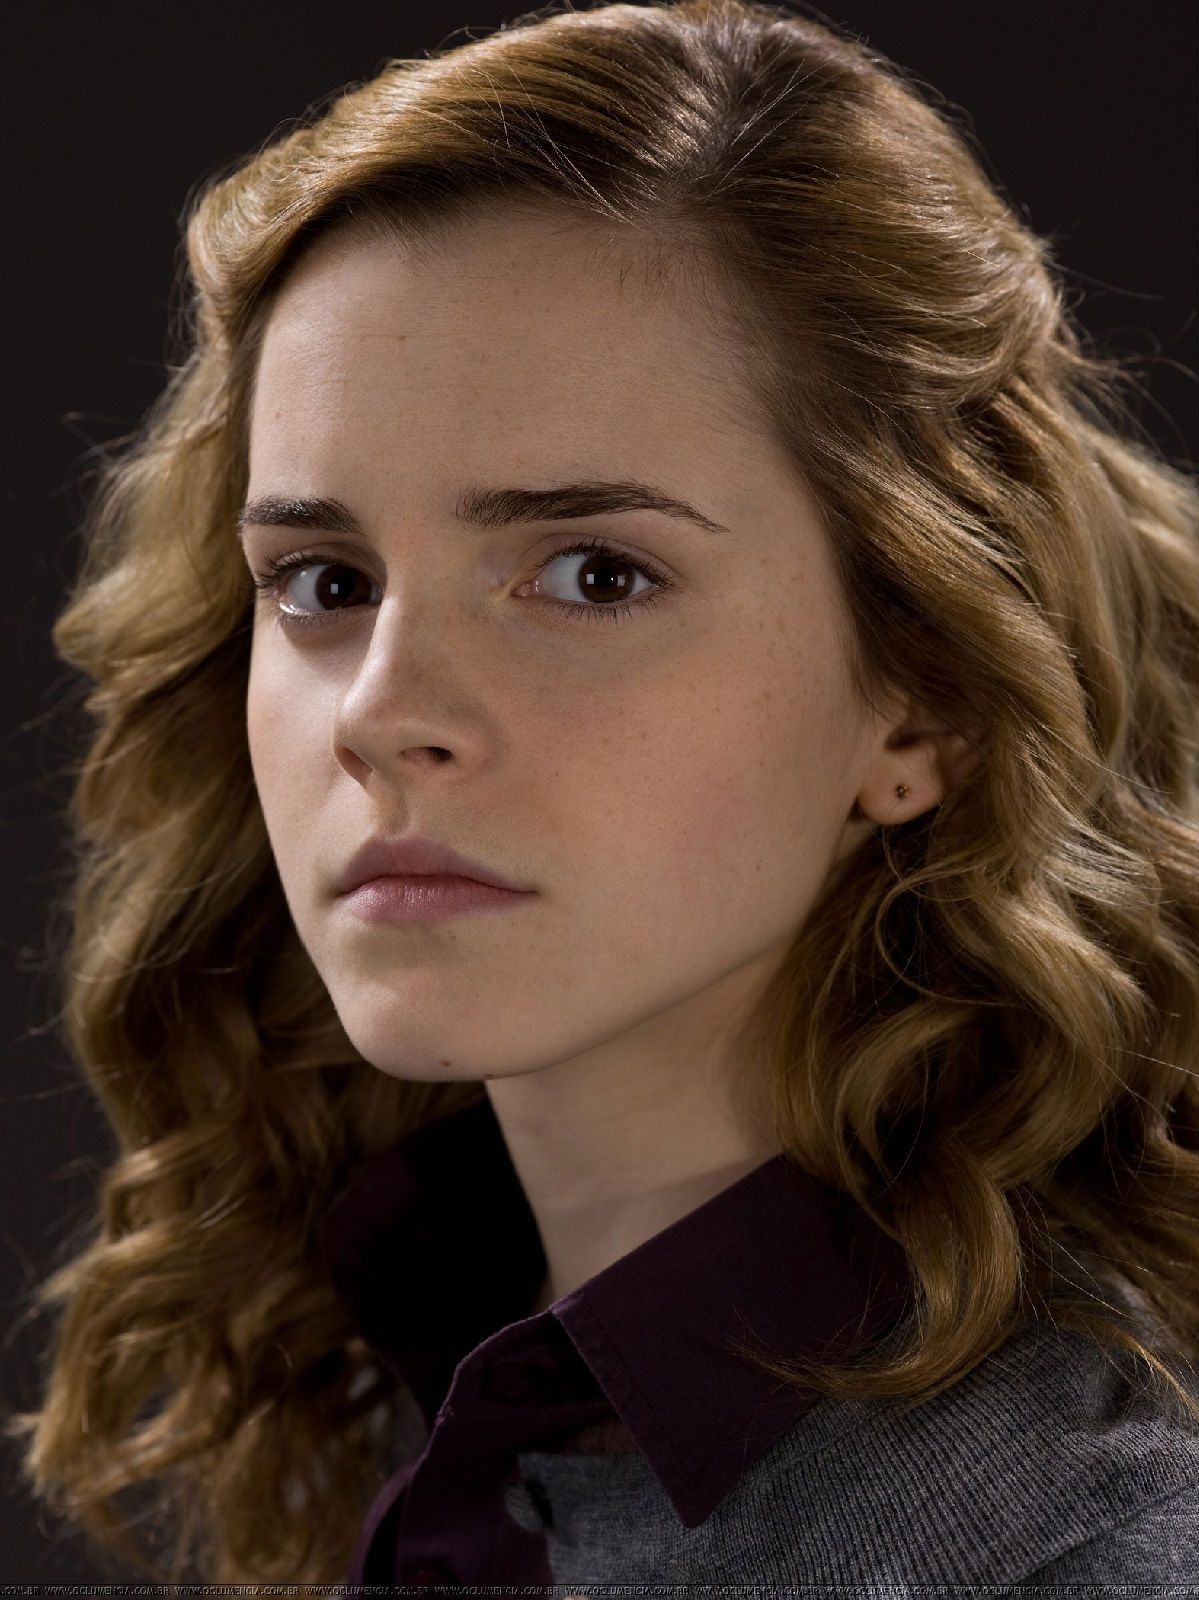 dennis uecker recommends Images Of Hermione In Harry Potter